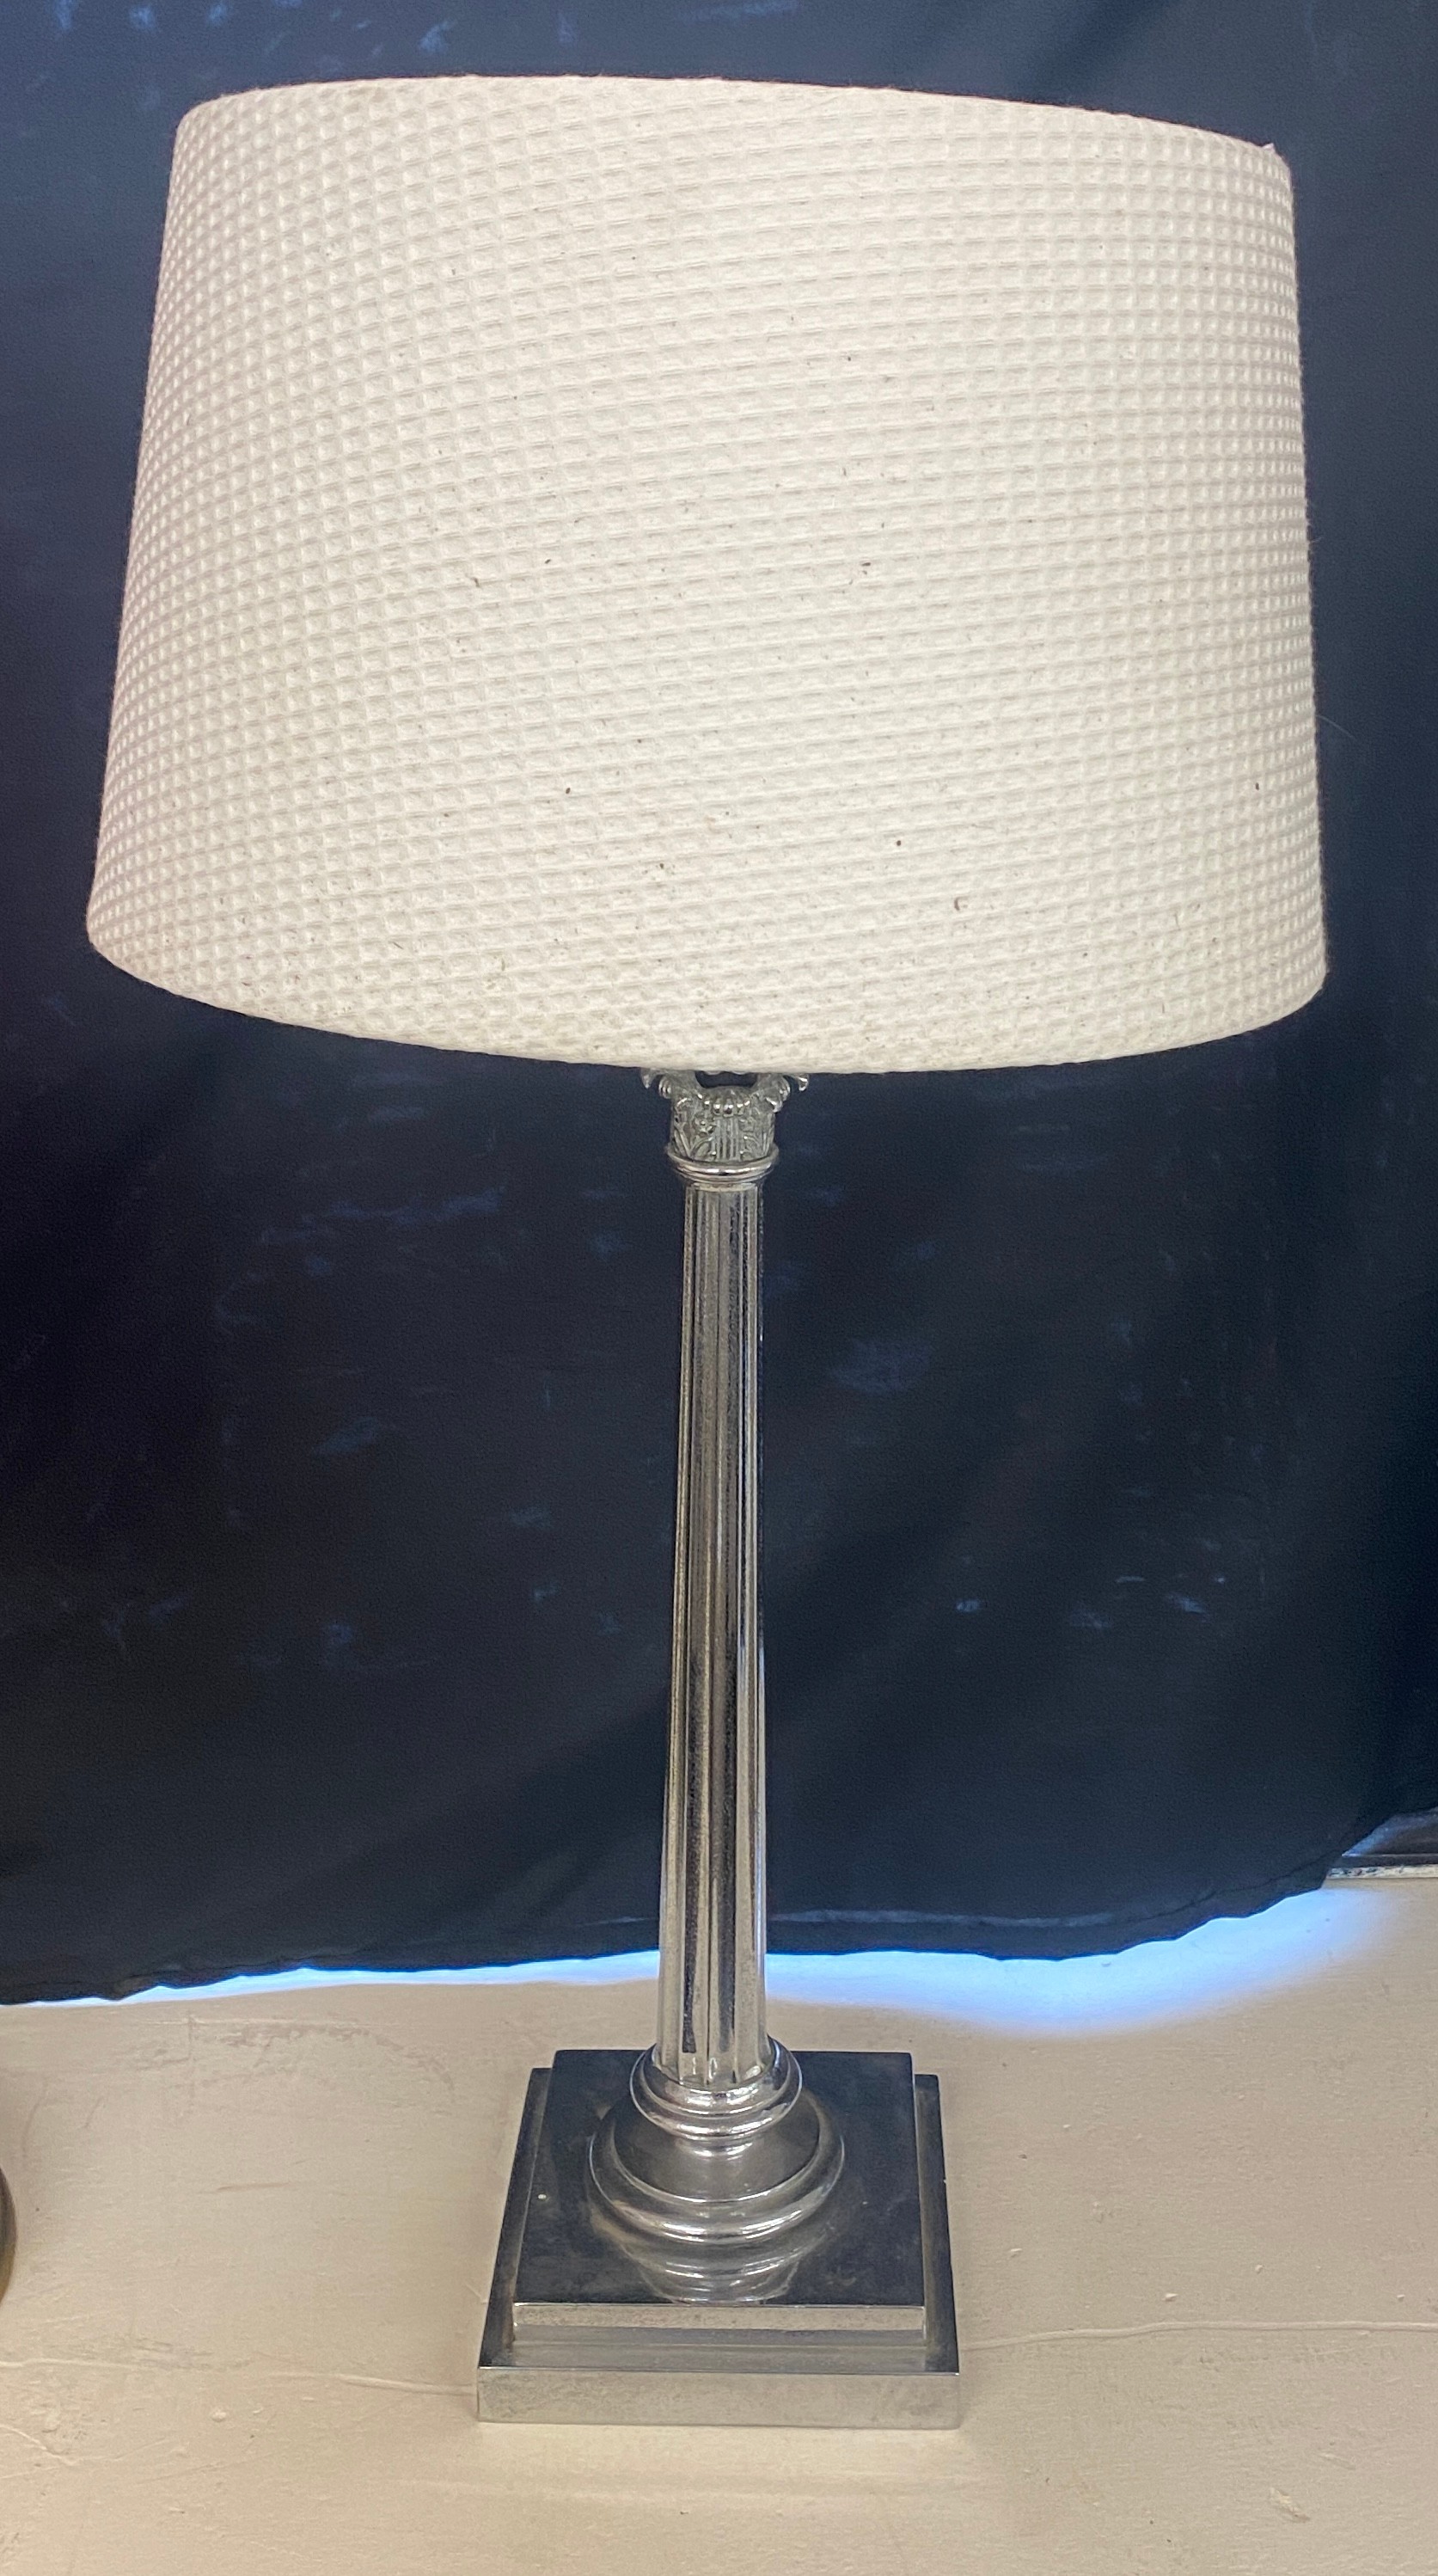 Edwardian Chrome table lamp with shade, approximate height 20.5 inches - Image 4 of 4